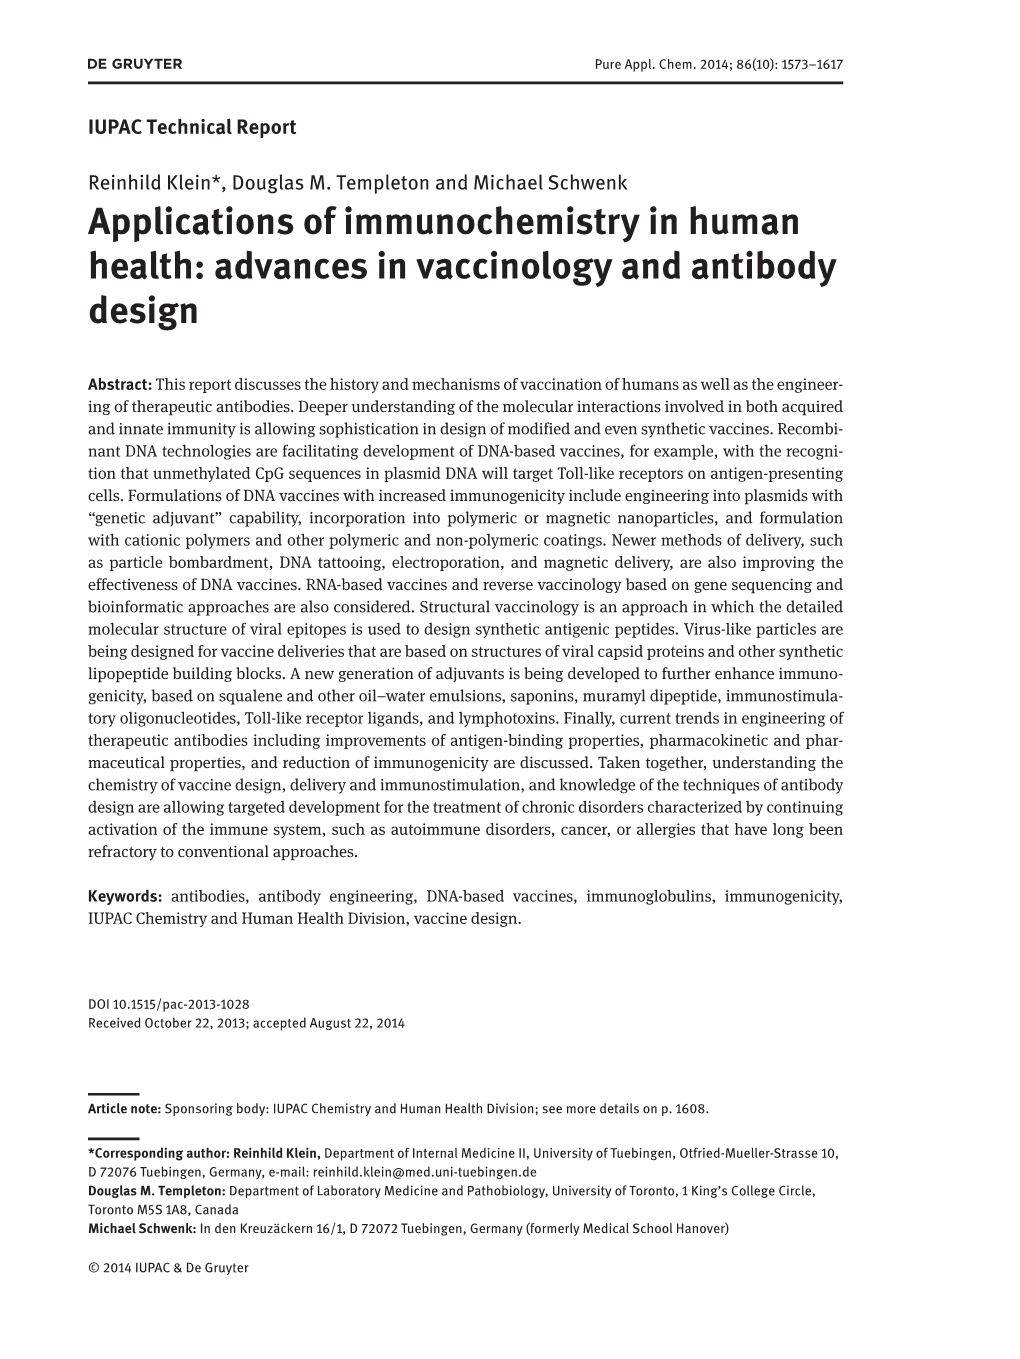 Advances in Vaccinology and Antibody Design